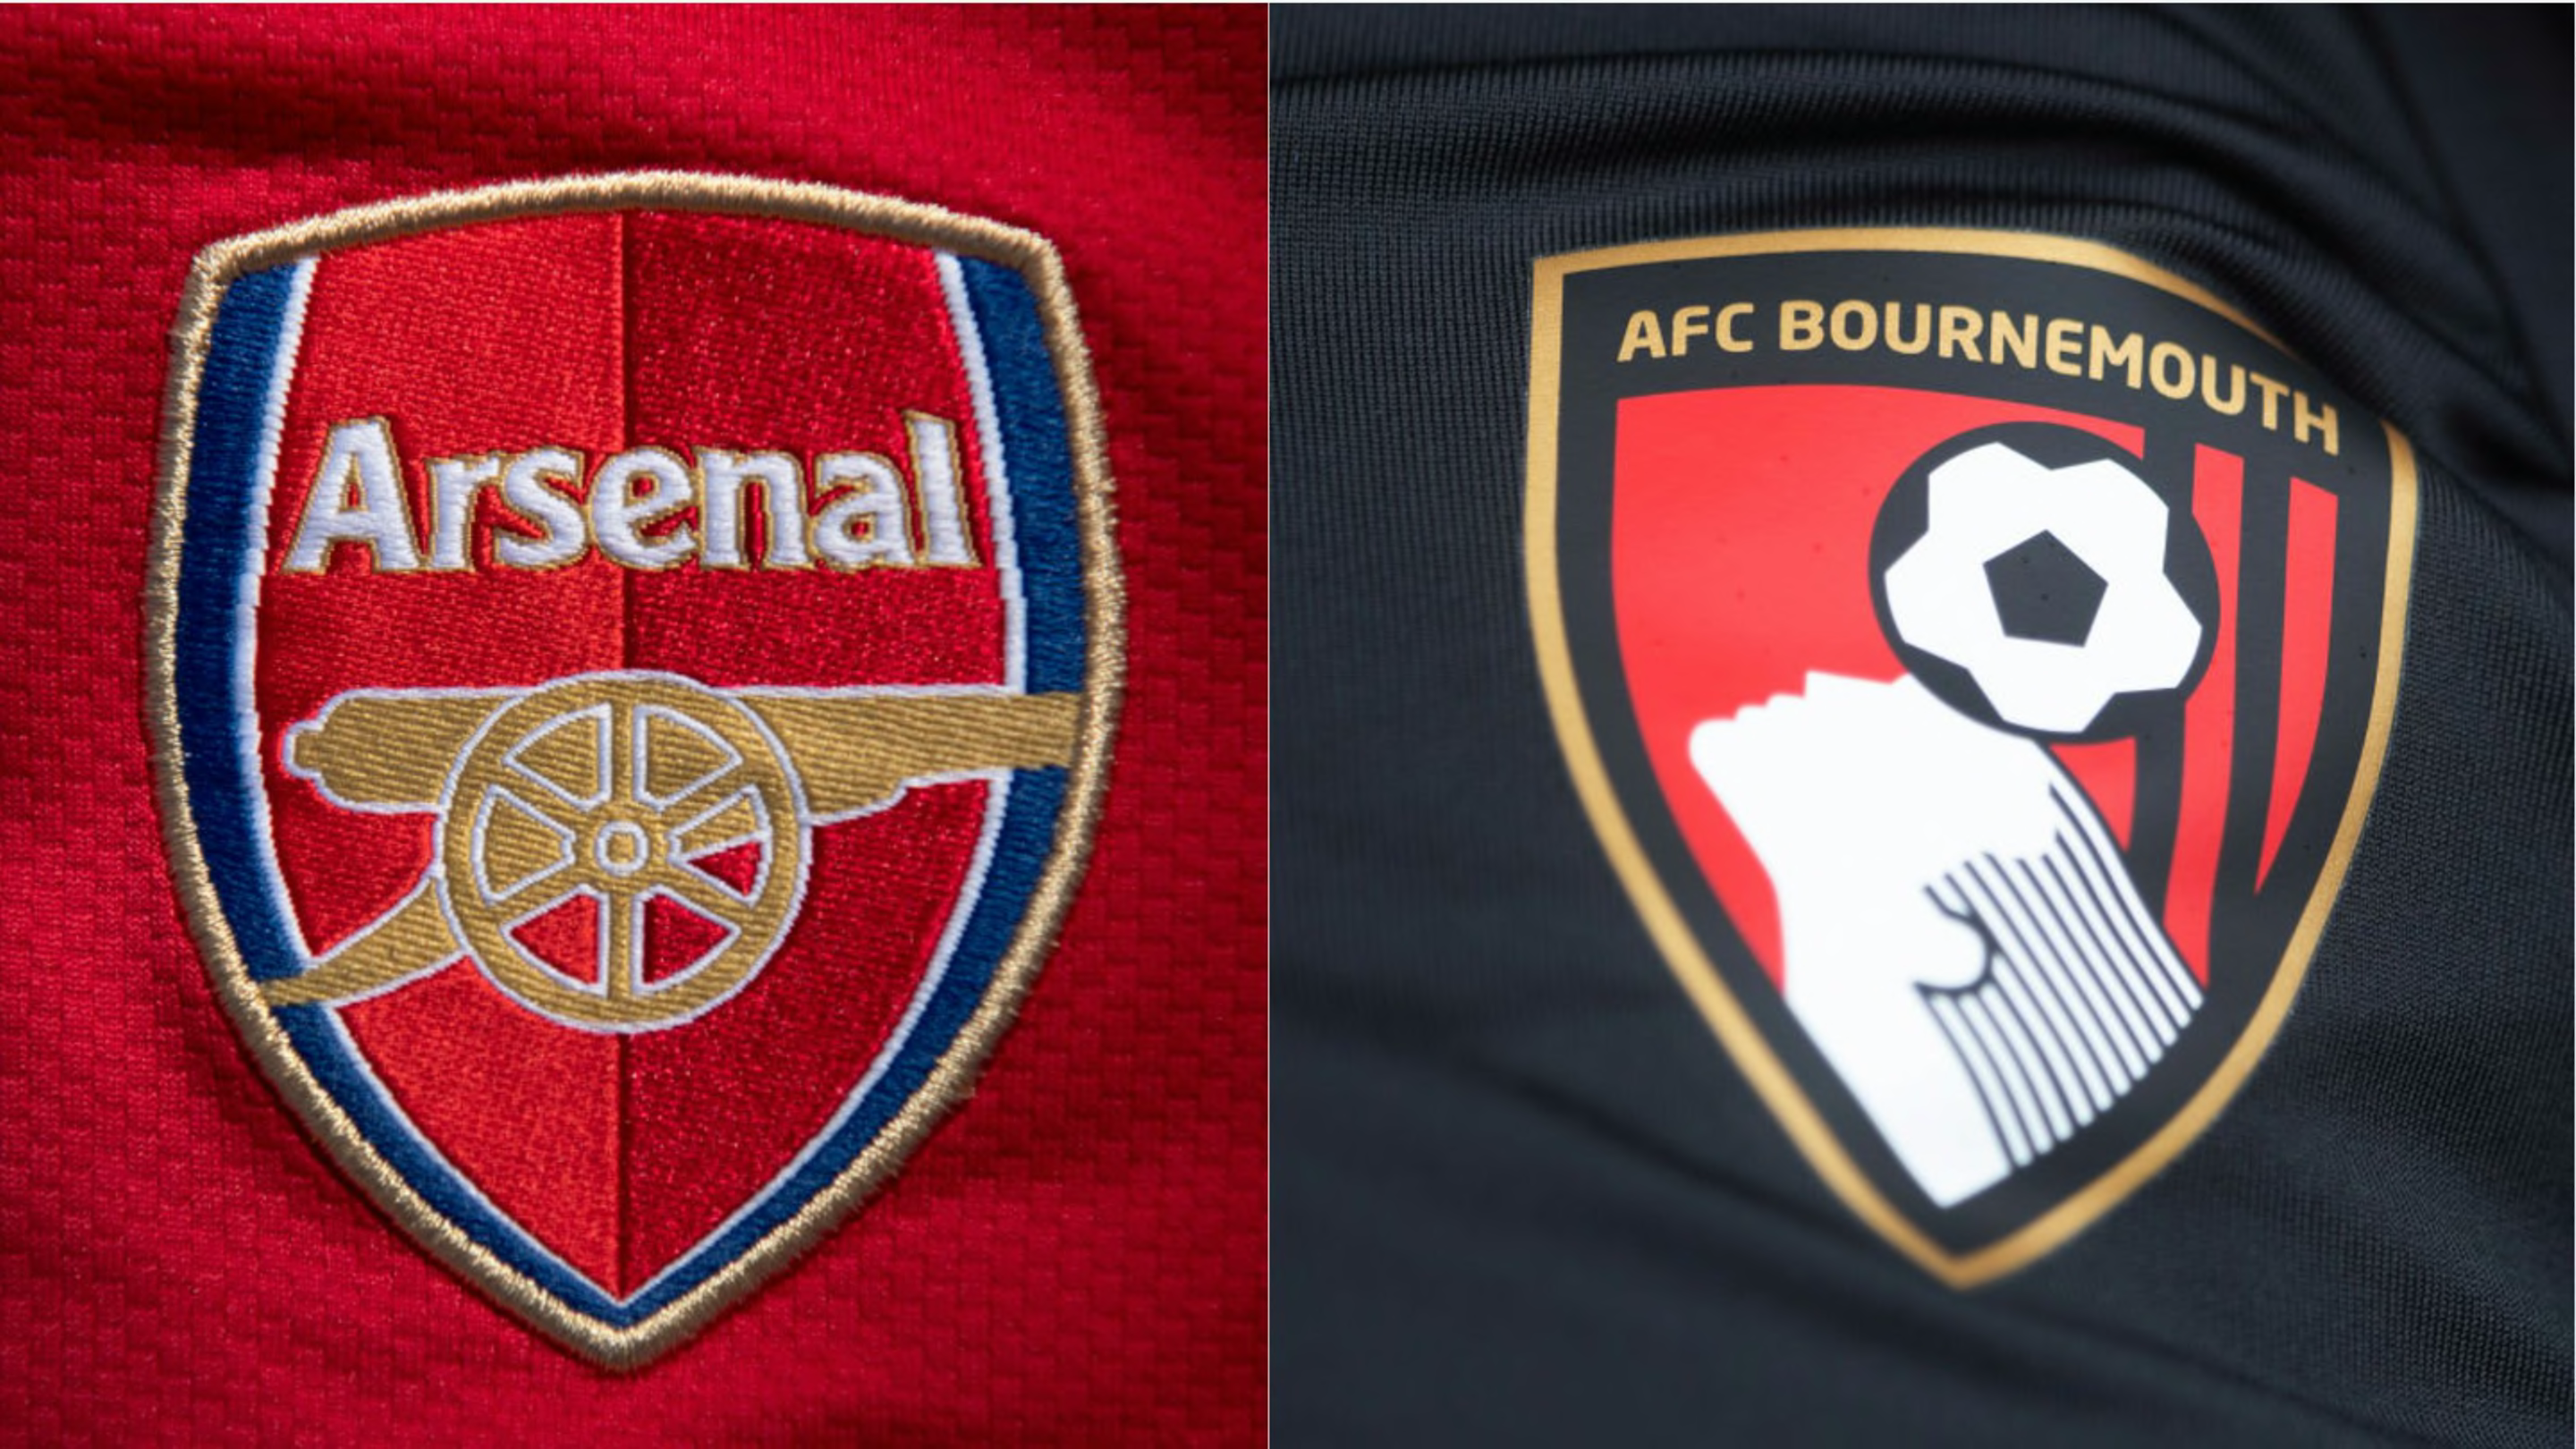 Arsenal vs Bournemouth: Preview, predictions and lineups